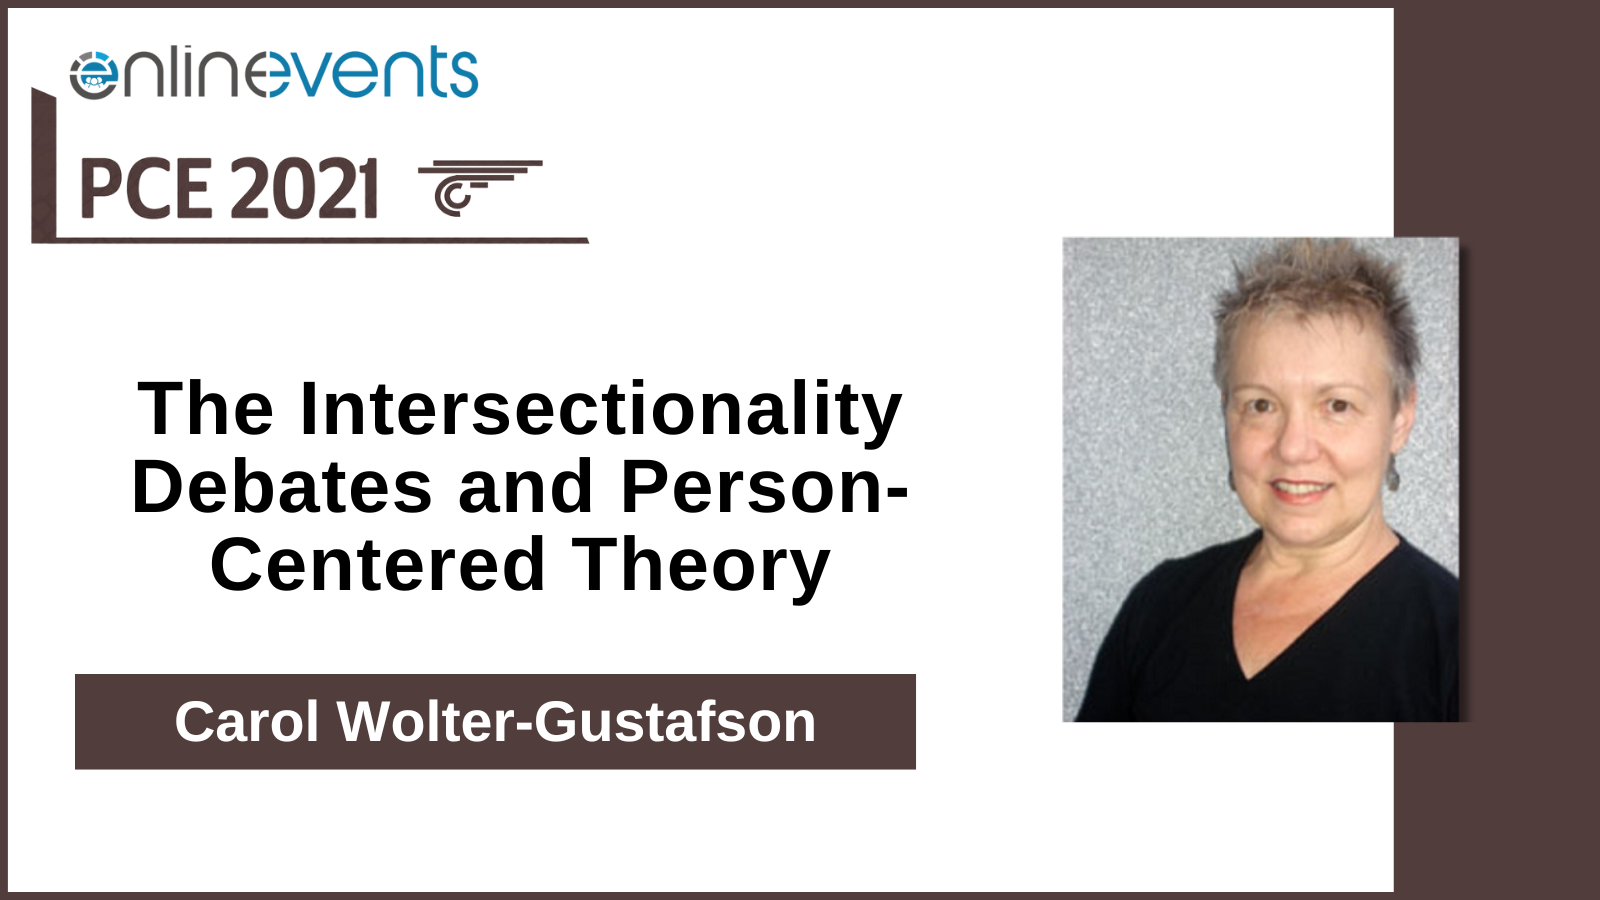 The Intersectionality Debates and Person-Centered Theory - Carol Wolter-Gustafson